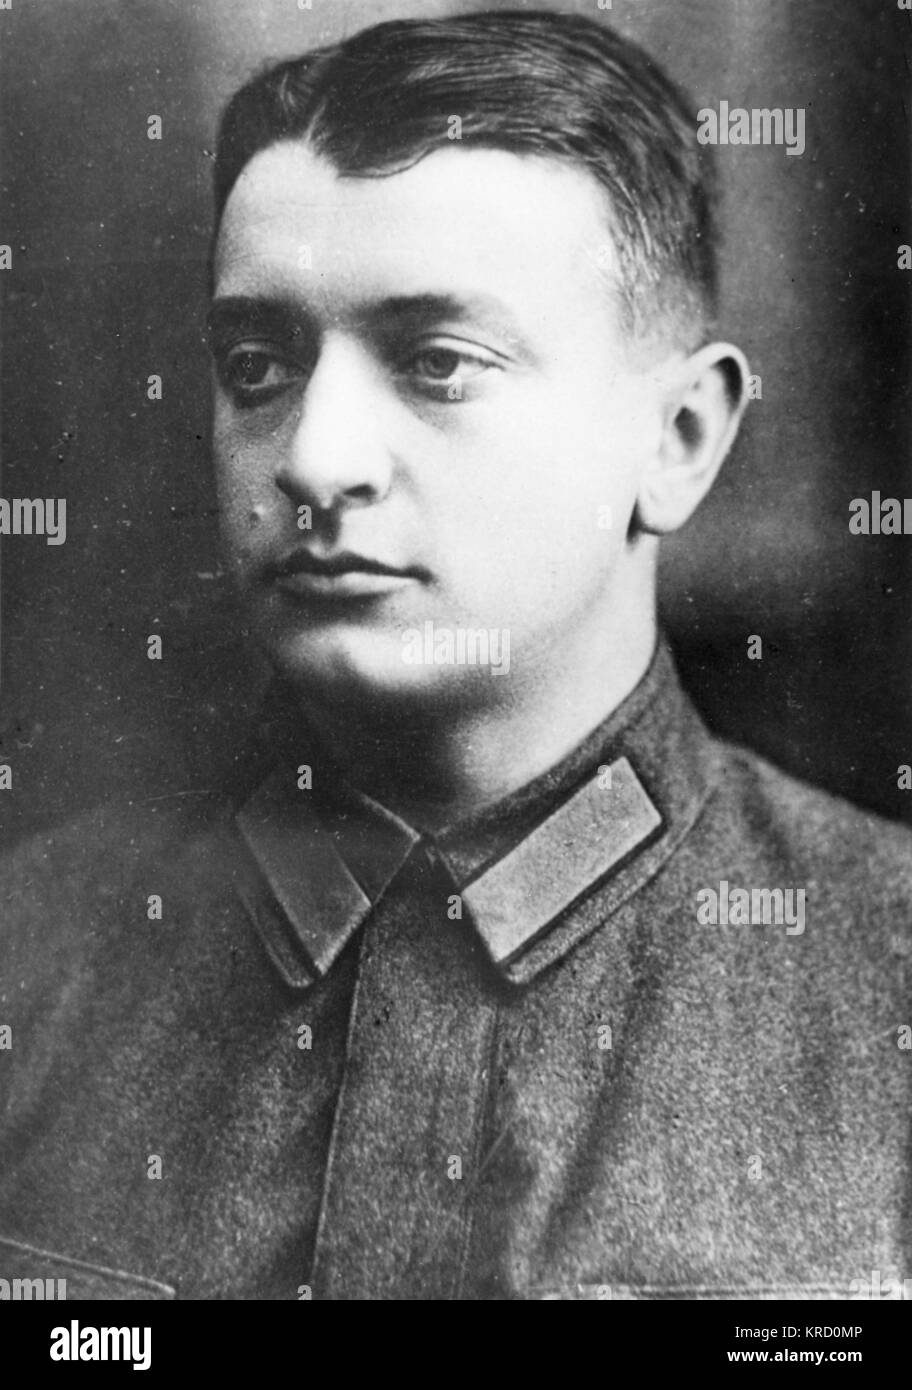 Mikhail Nikolayevich Tukhachevsky, Soviet military commander, Chief of the Red Army (1925-28).  He was one of the most prominent victims of Stalin's Great Purge of the late 1930s.        Date: 1893 - 1937 Stock Photo